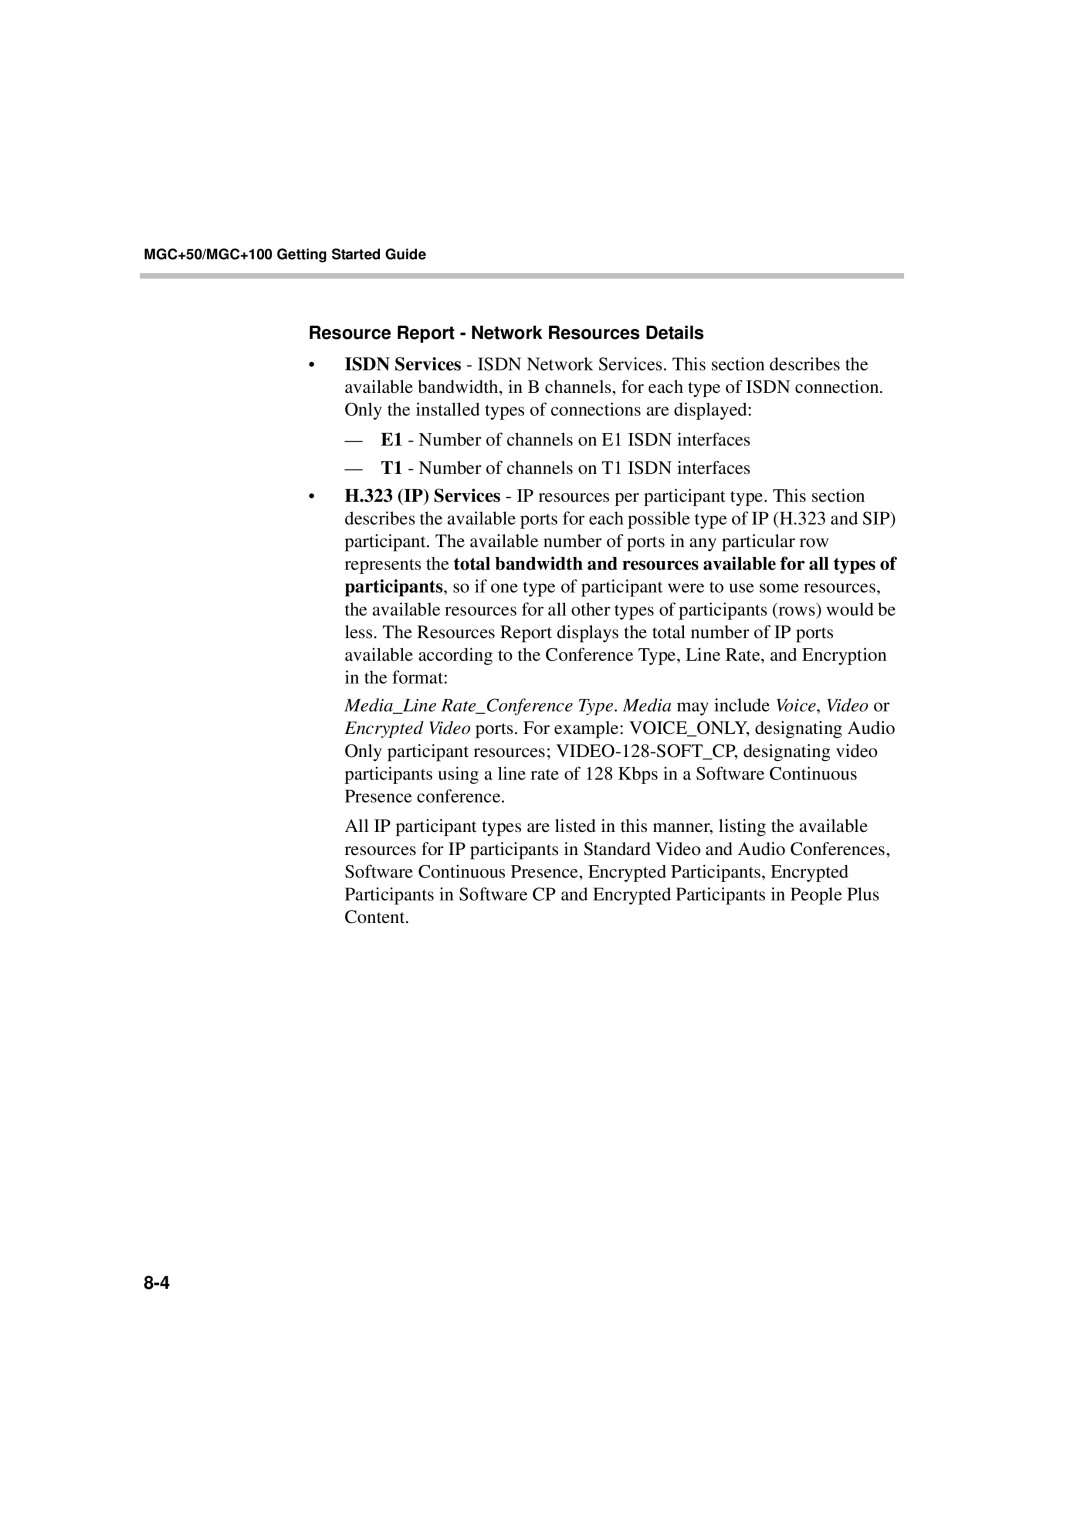 Polycom DOC2231A manual Resource Report Network Resources Details 